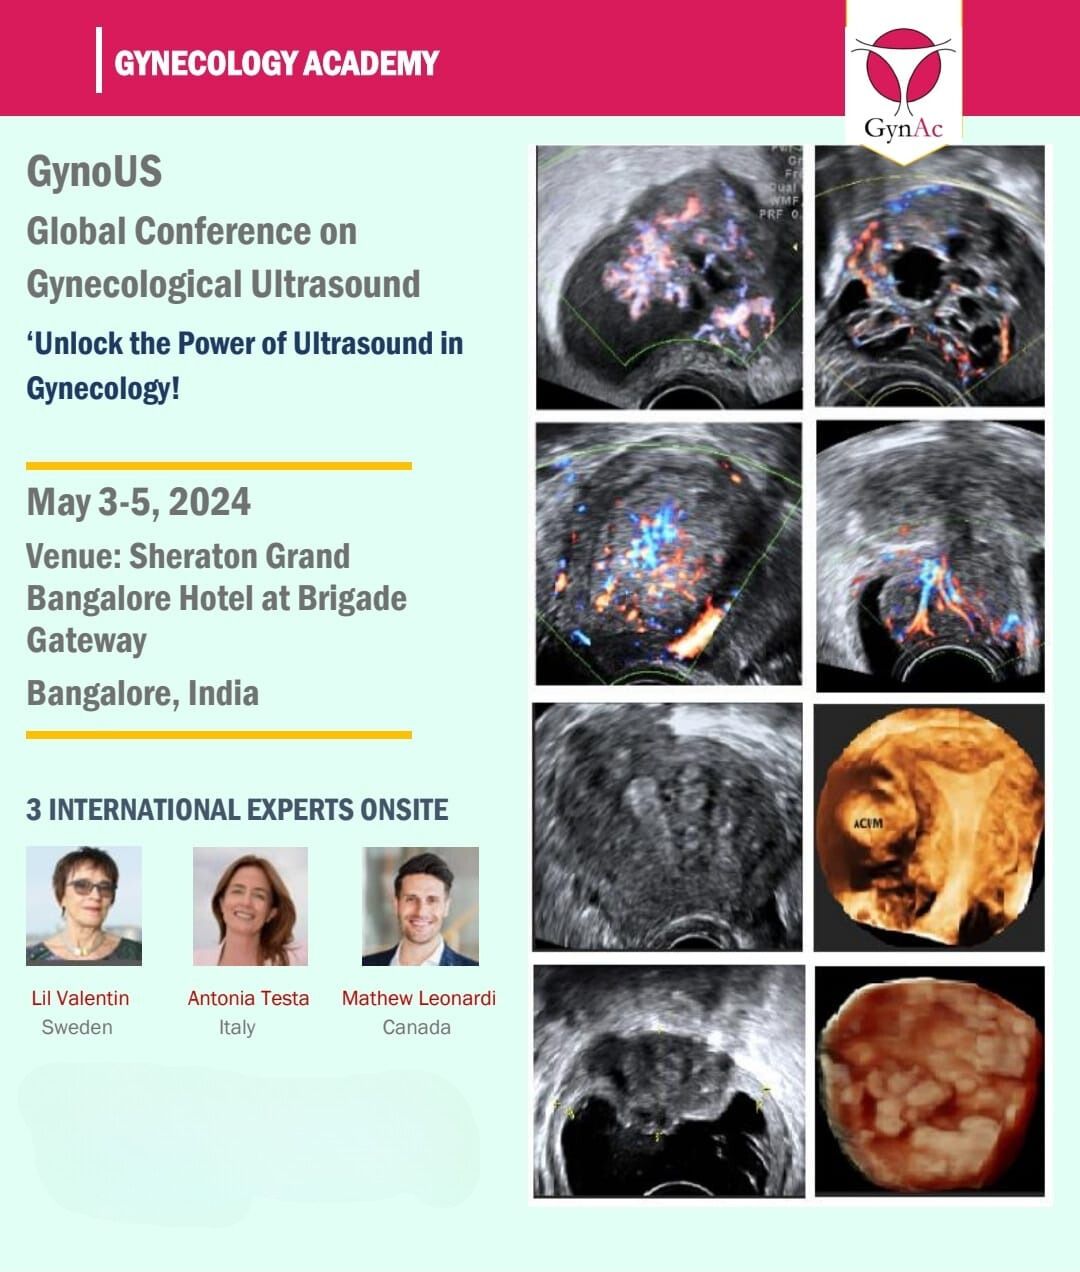 GynoUS - Global Conference on Gynecological Ultrasound